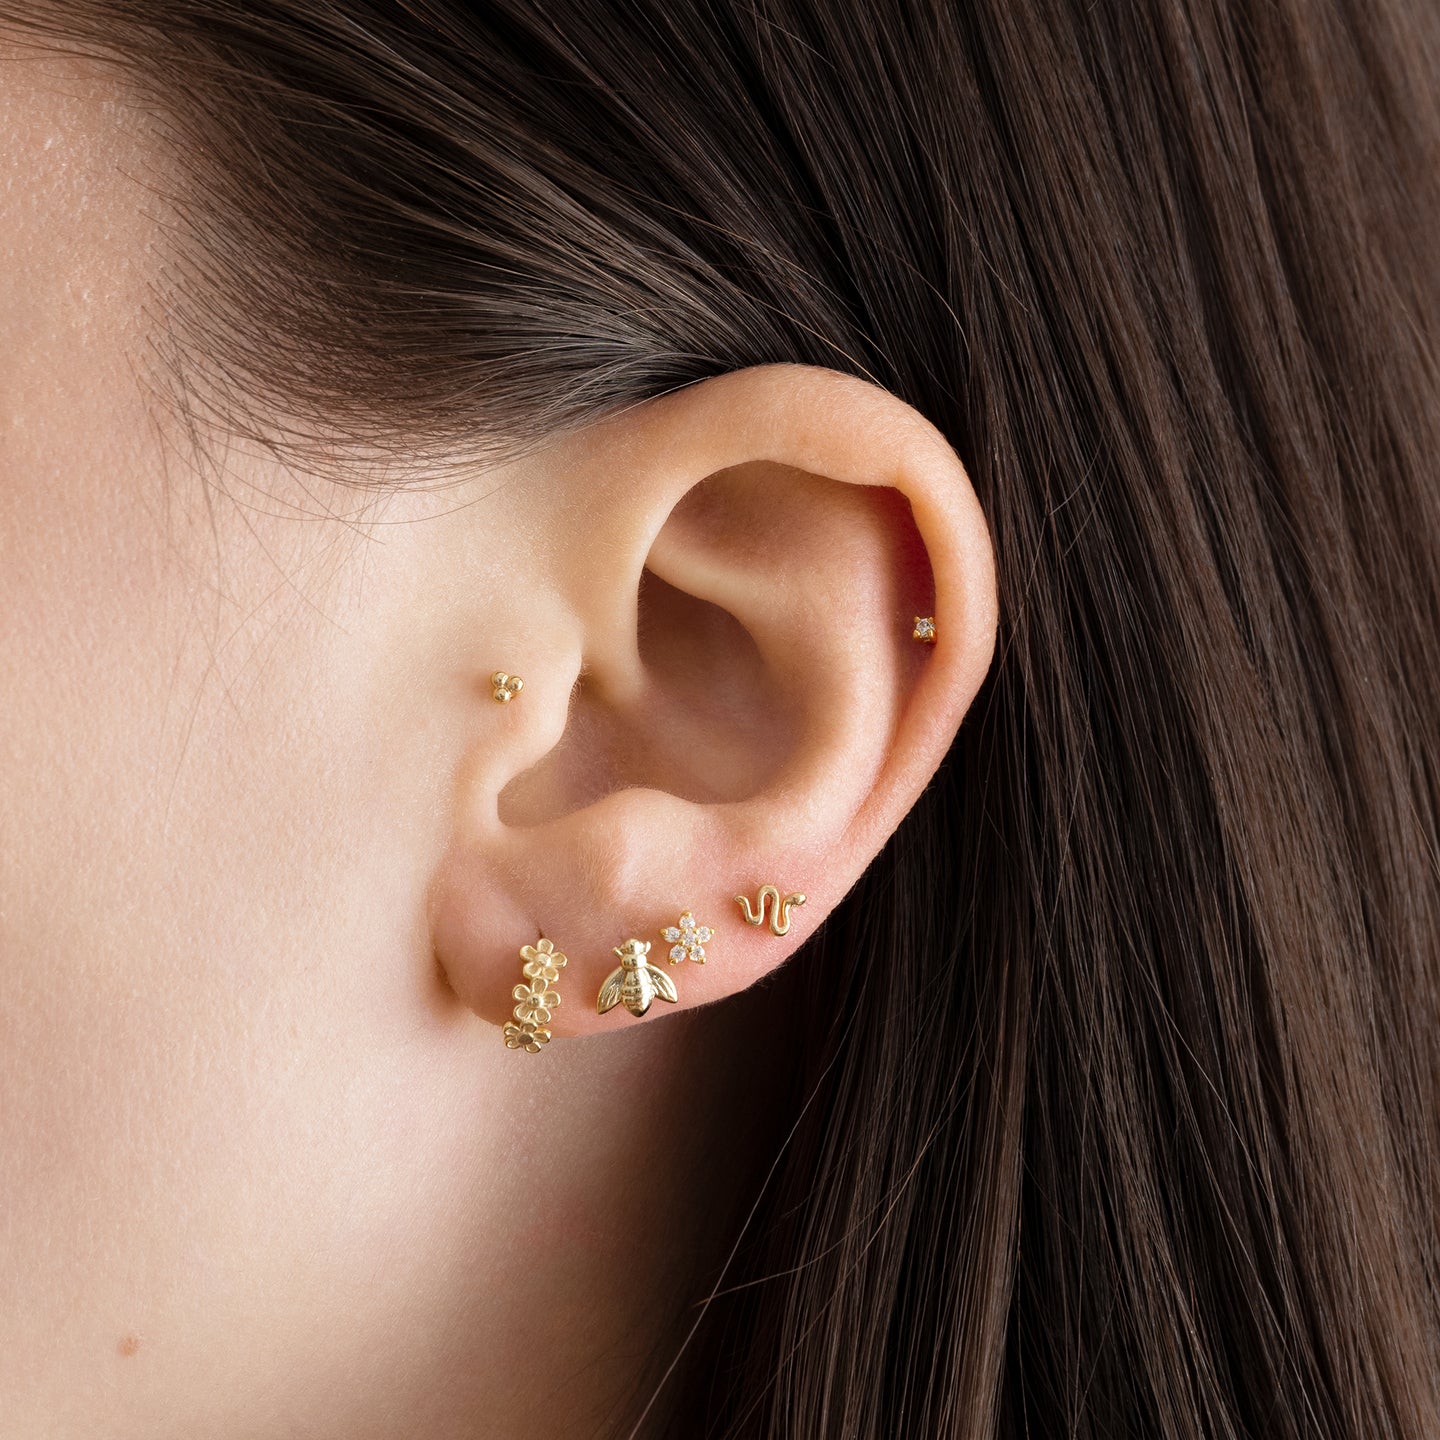 This is a small gold stud that looks like a snake on an ear. [hover] color:null|gold